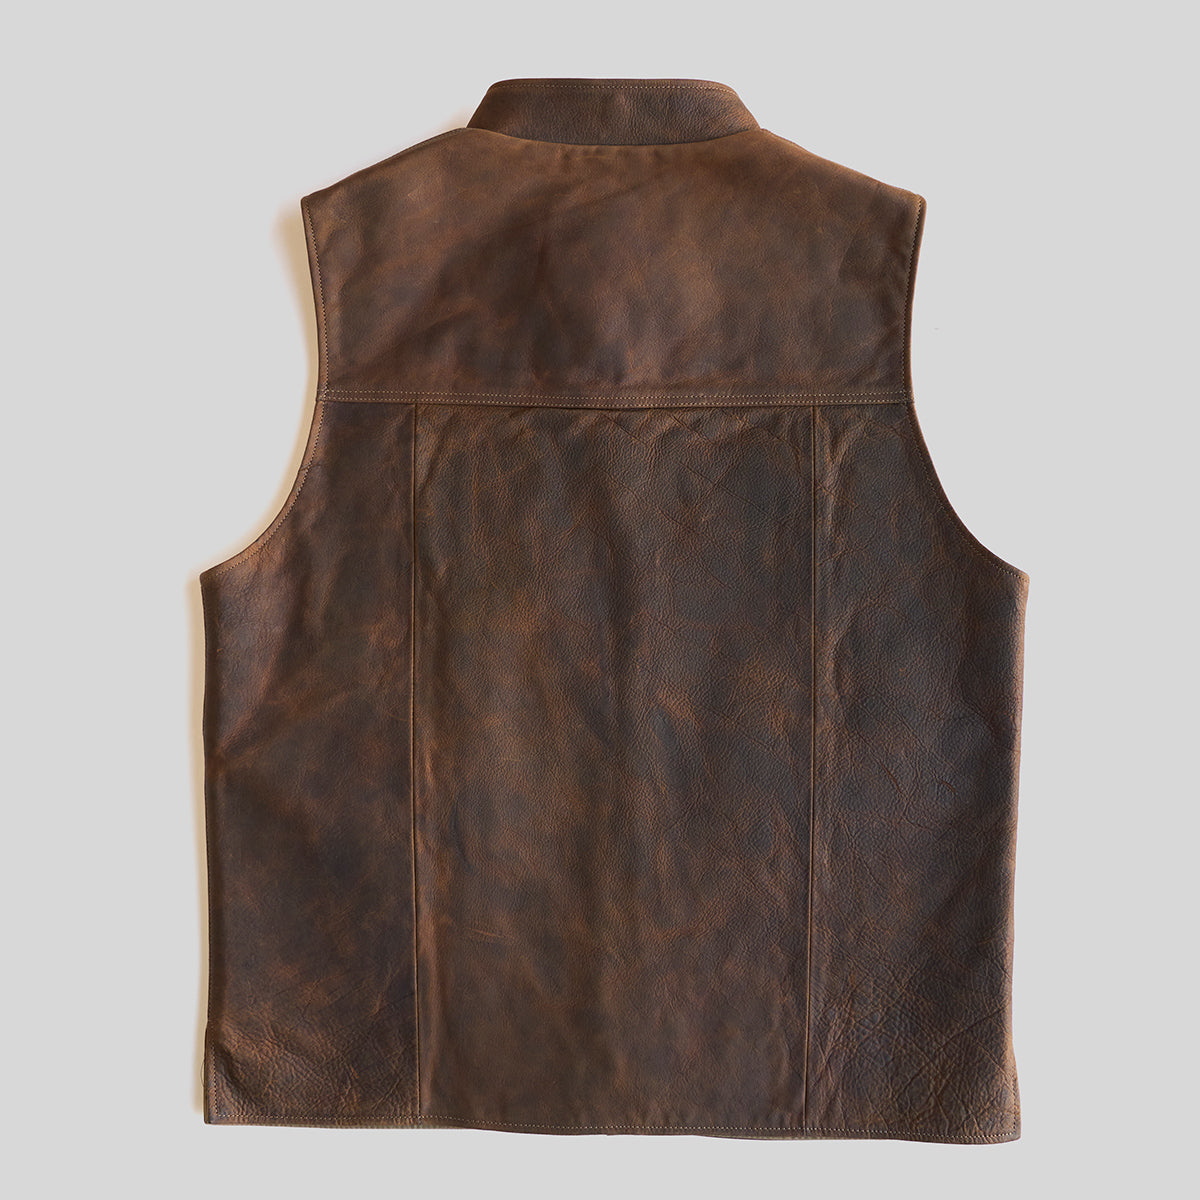 Distressed Light Brown Vintage Double Face Shearling Vest